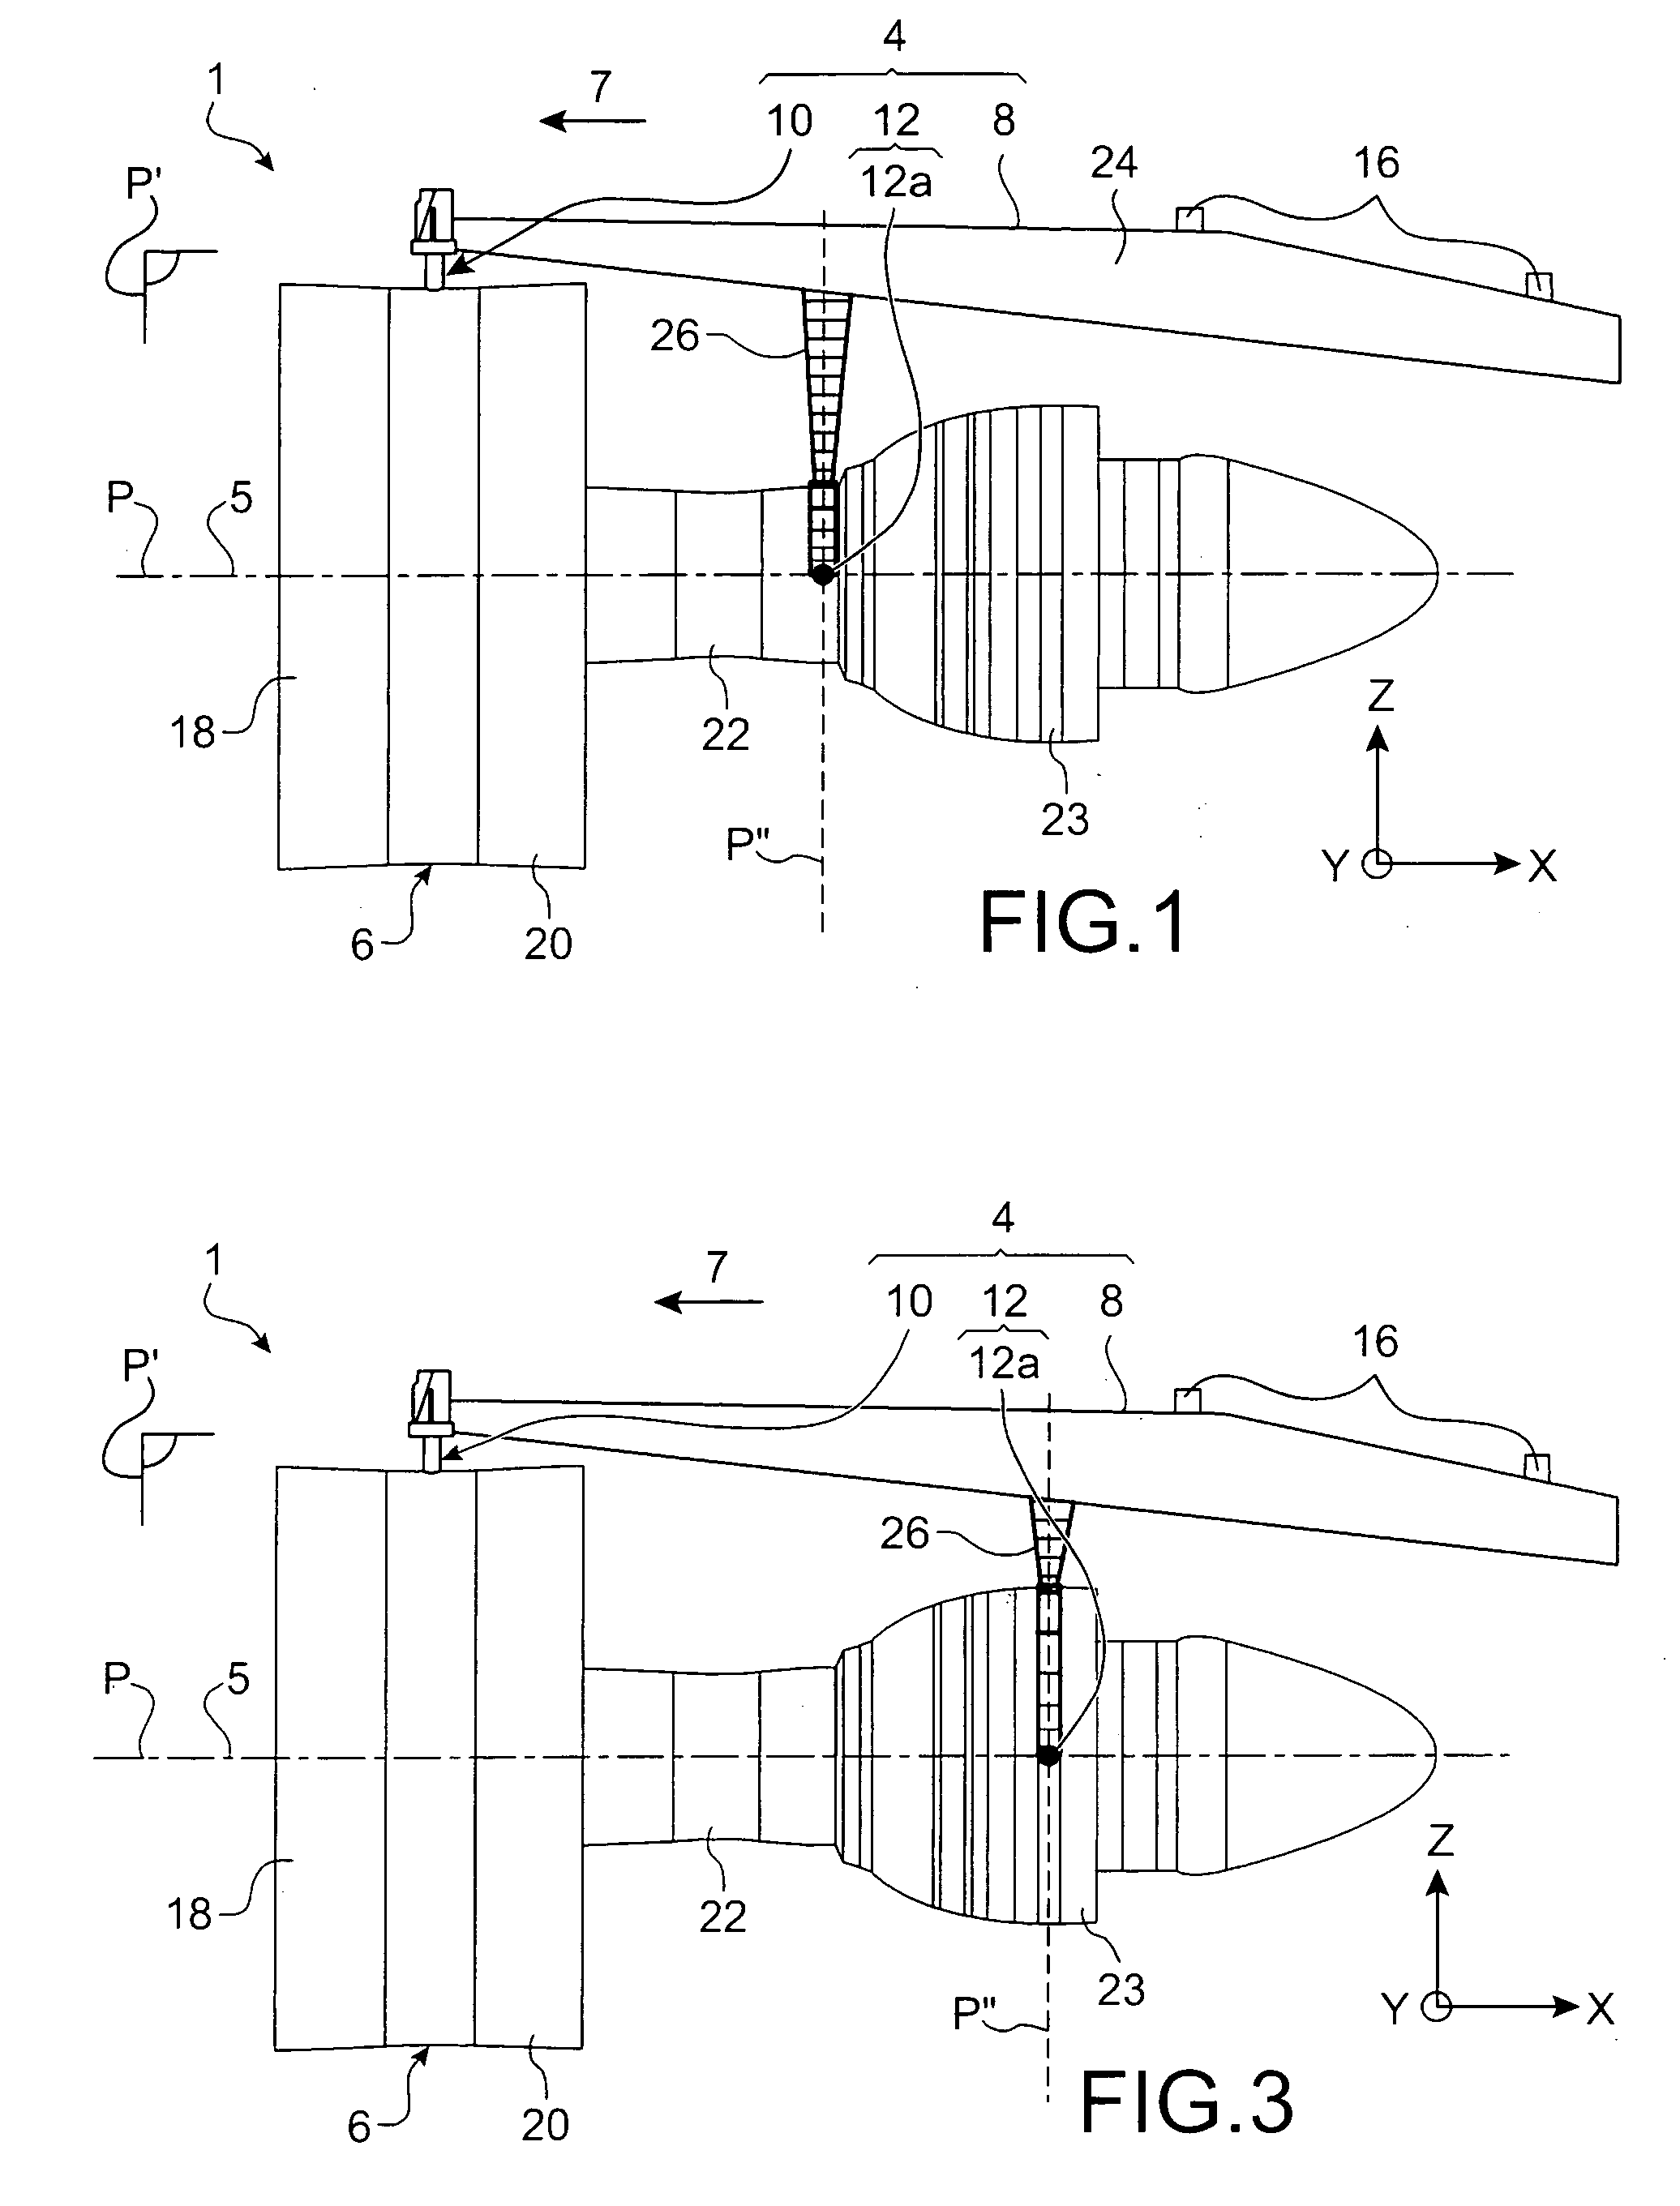 Engine assembly for aircraft comprising an engine and a mounting device for such an engine